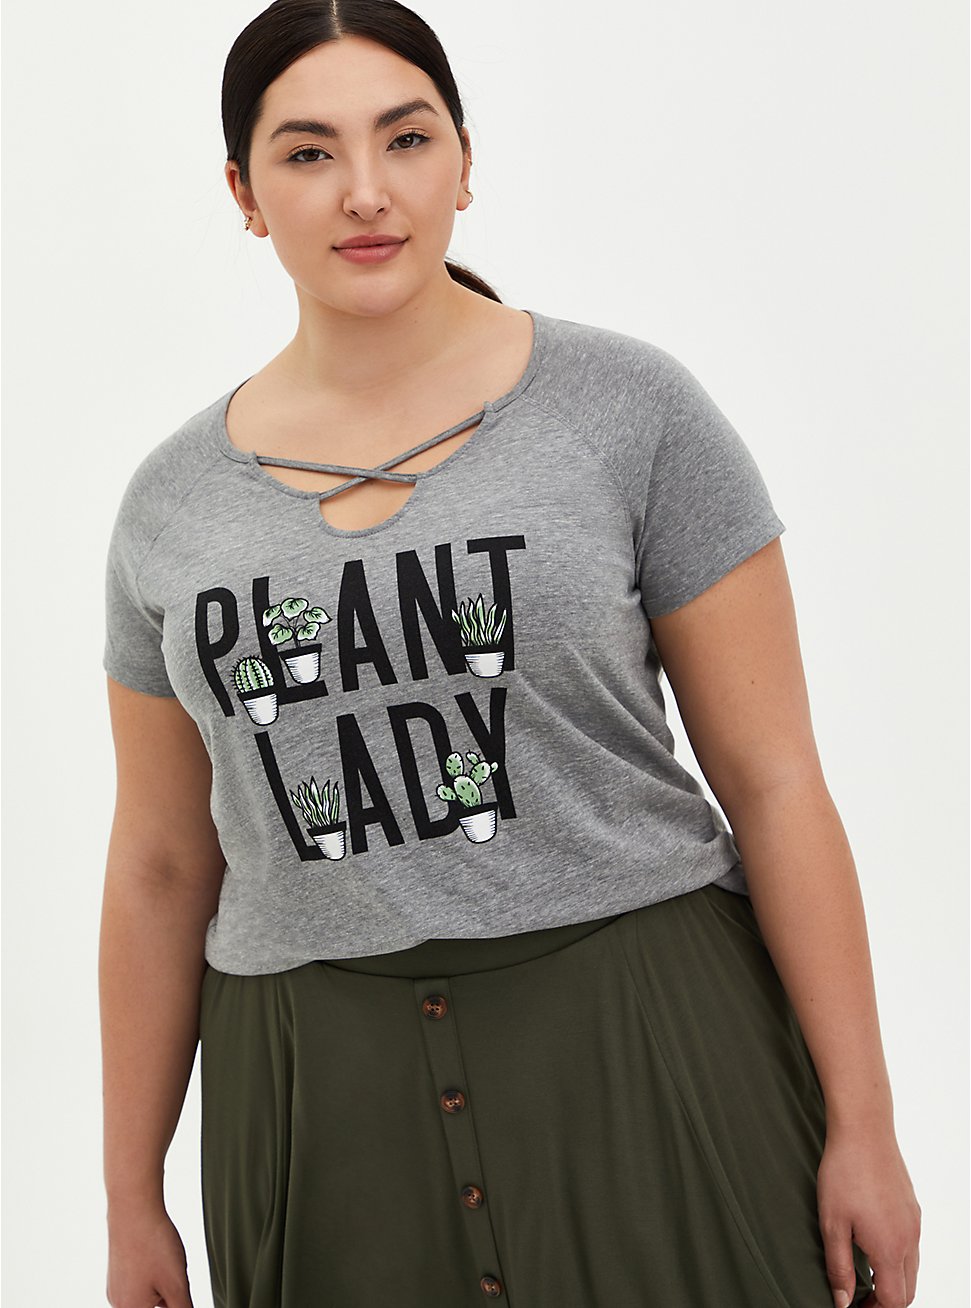 Classic Fit Crew Tee - Triblend Jersey Plant Lady Grey Strappy , MEDIUM HEATHER GREY, hi-res